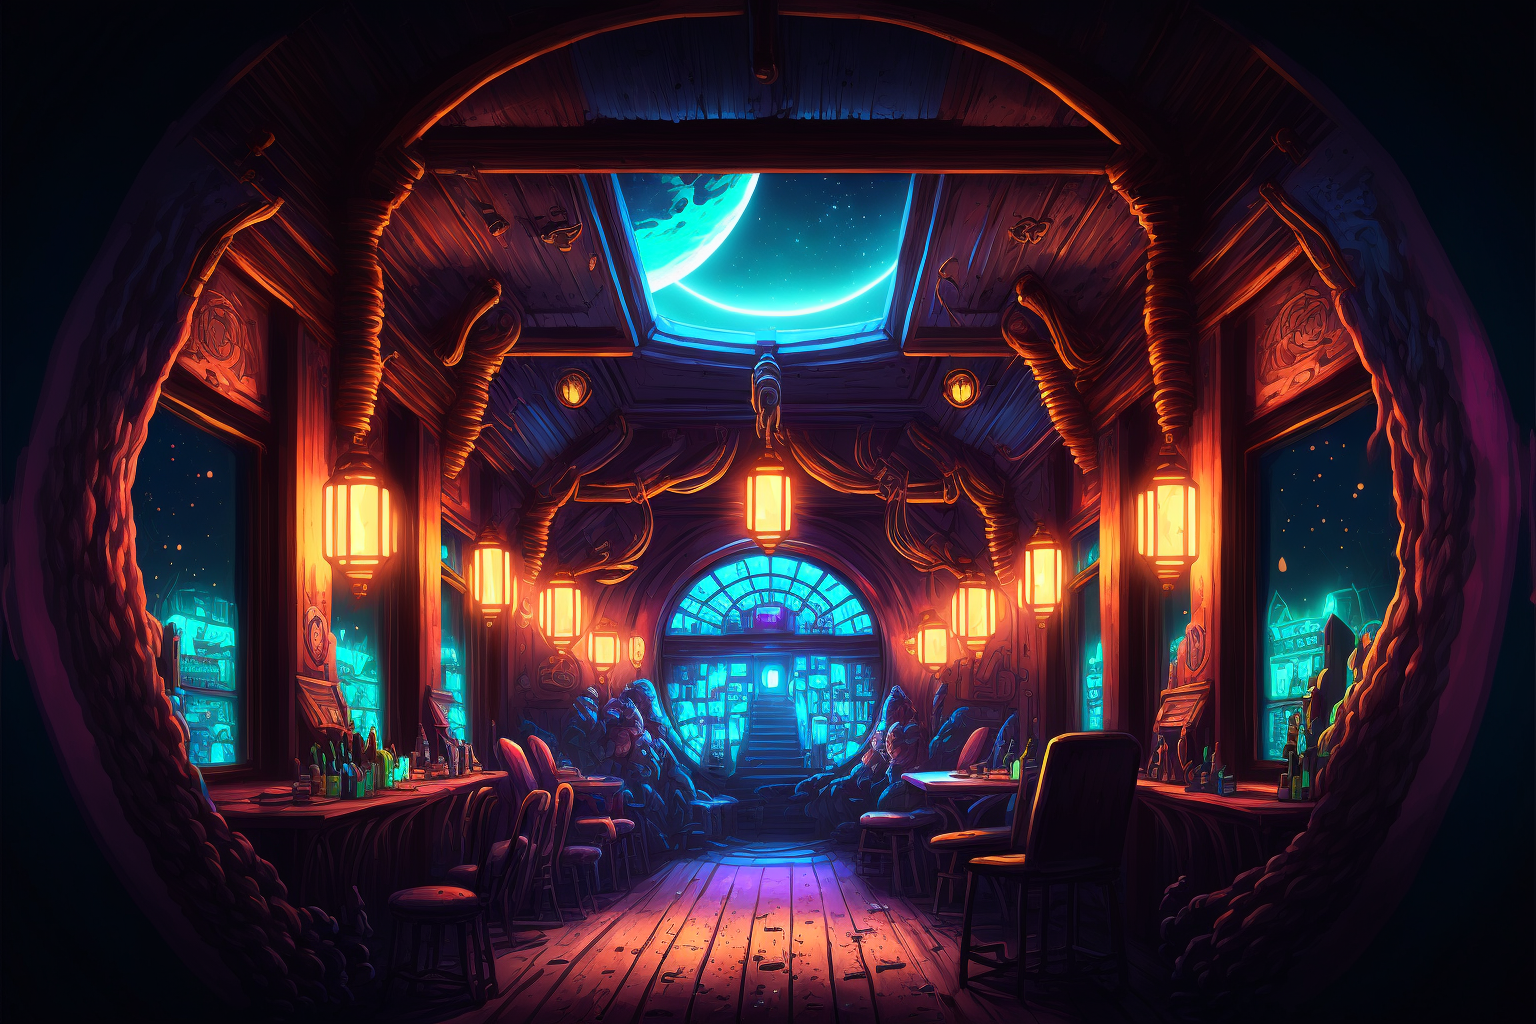 MadDoginSF_inside_a_massive_western_saloon_in_outer_space_lante_e612983b-7d94-4012-851f-0feb196feaad.png